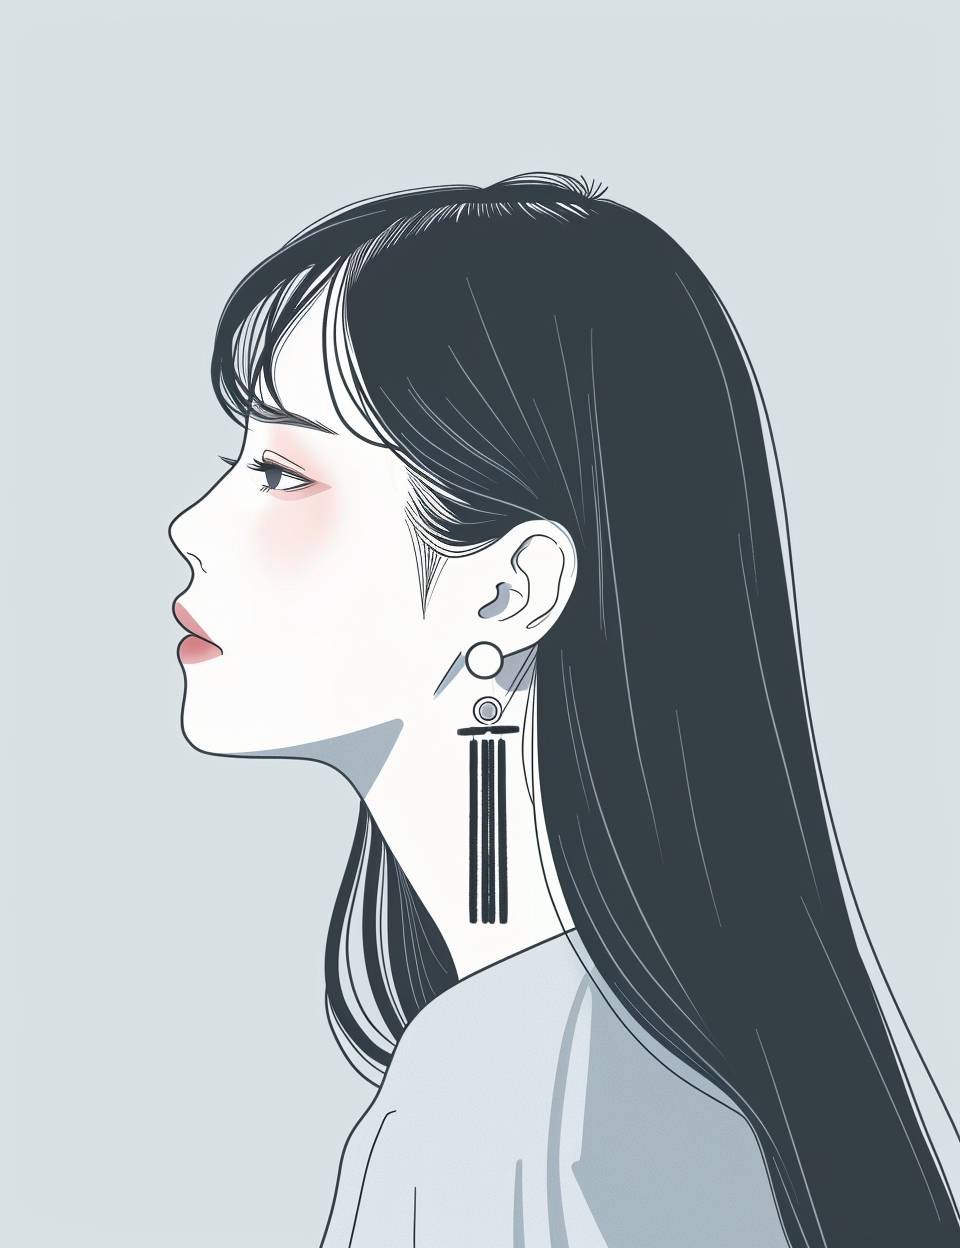 A simple and cute illustration of an Asian woman with long straight hair, featuring gray-pink makeup on her face. She is wearing earrings in the shape of black stripes, and she has one ear ring. The background color should be white or light blue to highlight the character's features. In the style of Japanese anime, it showcases a minimalist design aesthetic. Her head tilt angle creates a charming profile picture, focus stacked.